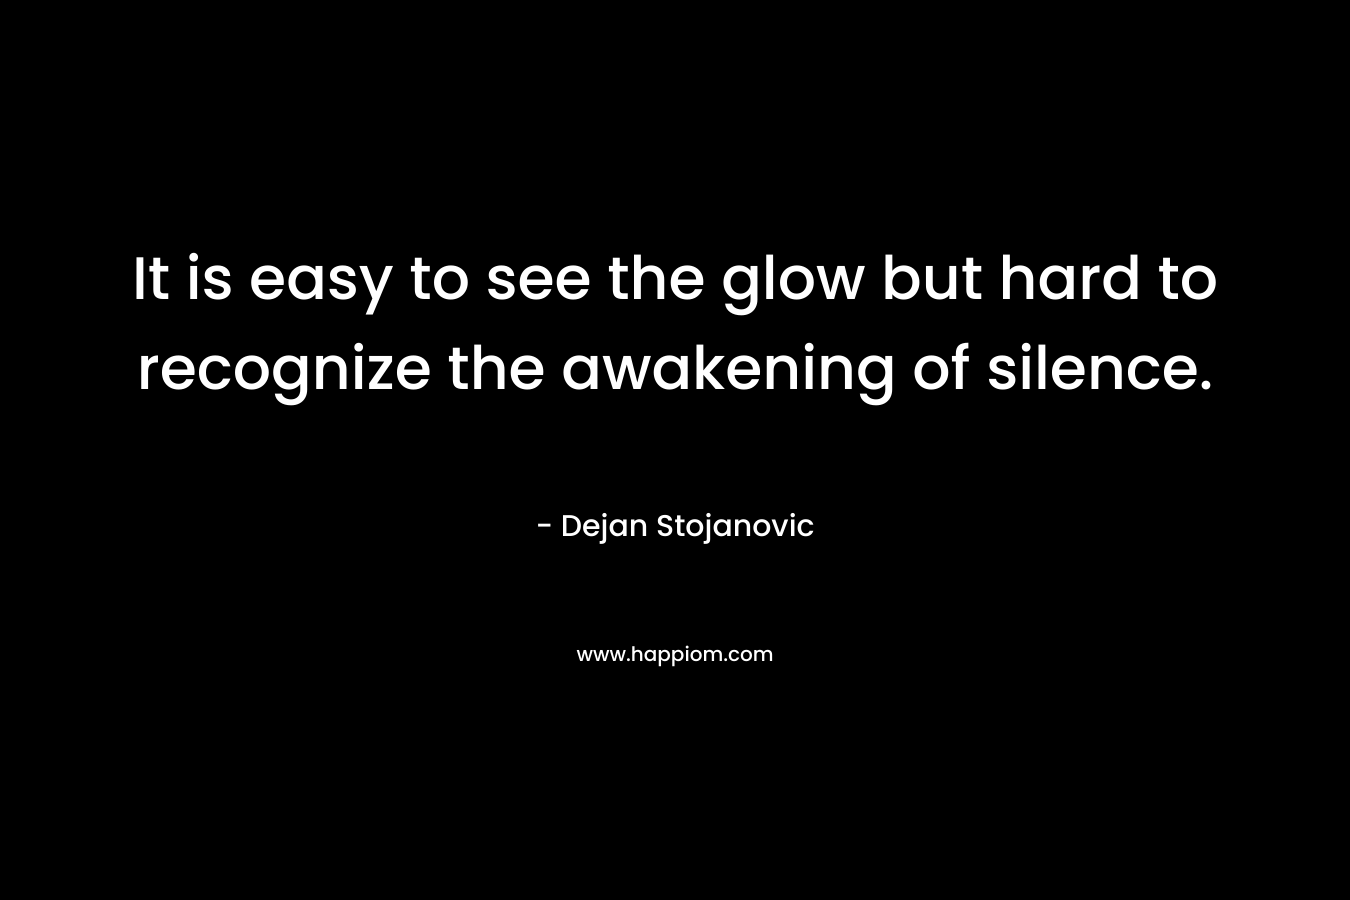 It is easy to see the glow but hard to recognize the awakening of silence.